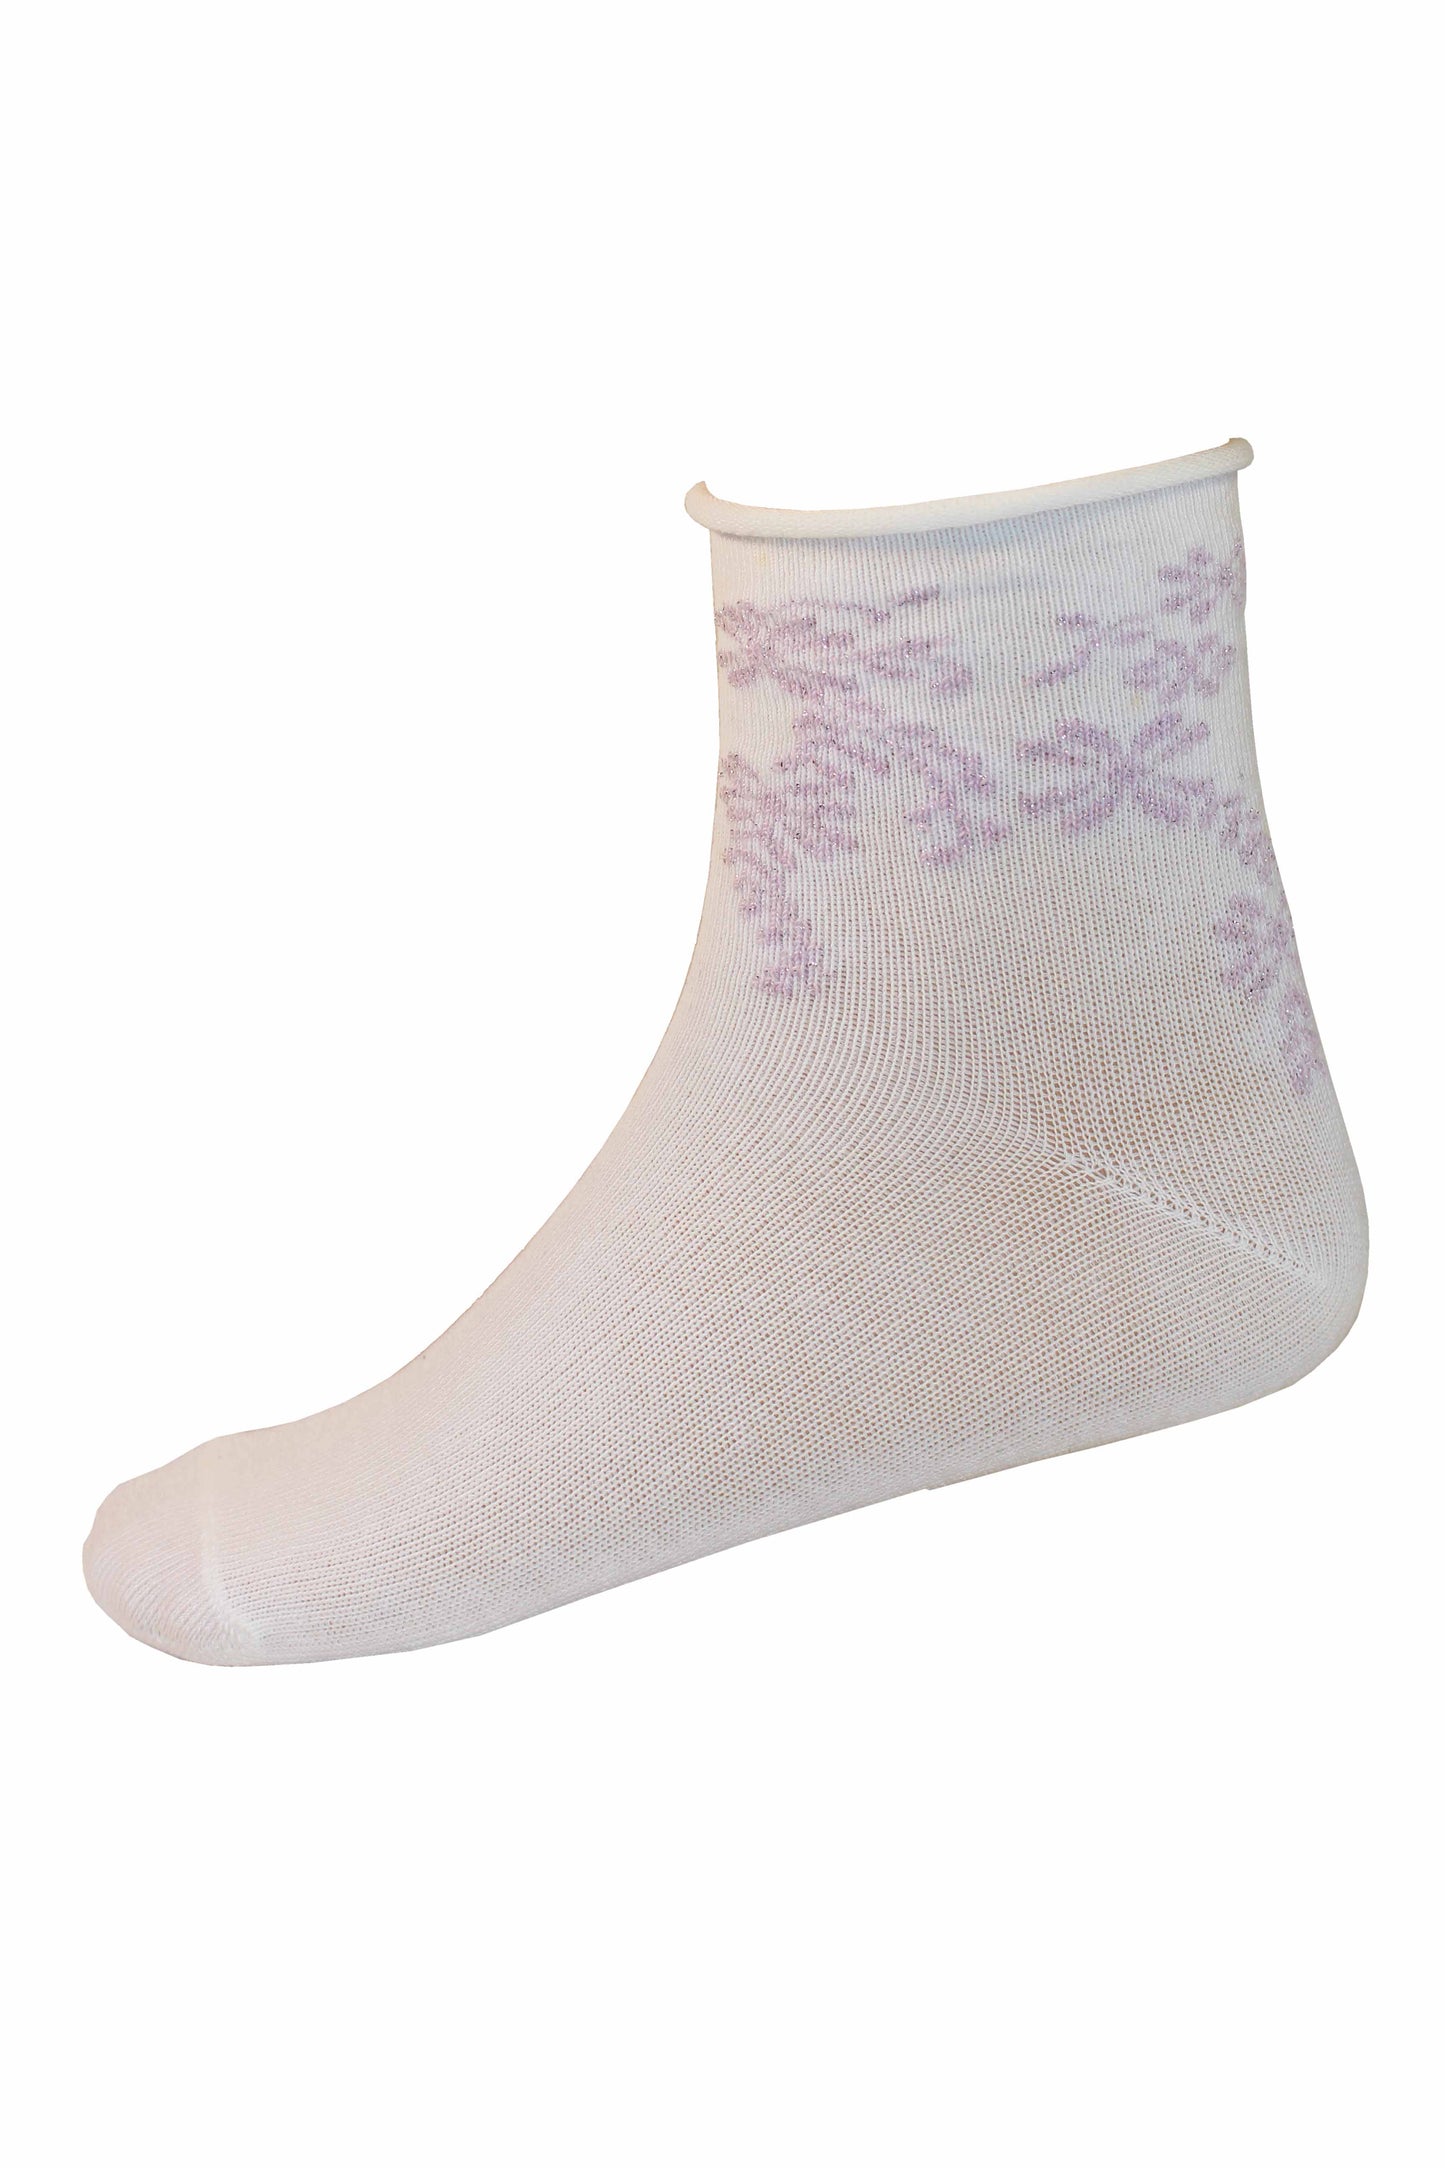 Omsa Serenella Origami Calzino - Light pink children's cotton ankle socks with a horizontal stripe pattern in pastel shades of lilac, pink, yellow and white with a double sock effect cuff with scalloped edge on one cuff and roll top no cuff on the other with a floral pattern.